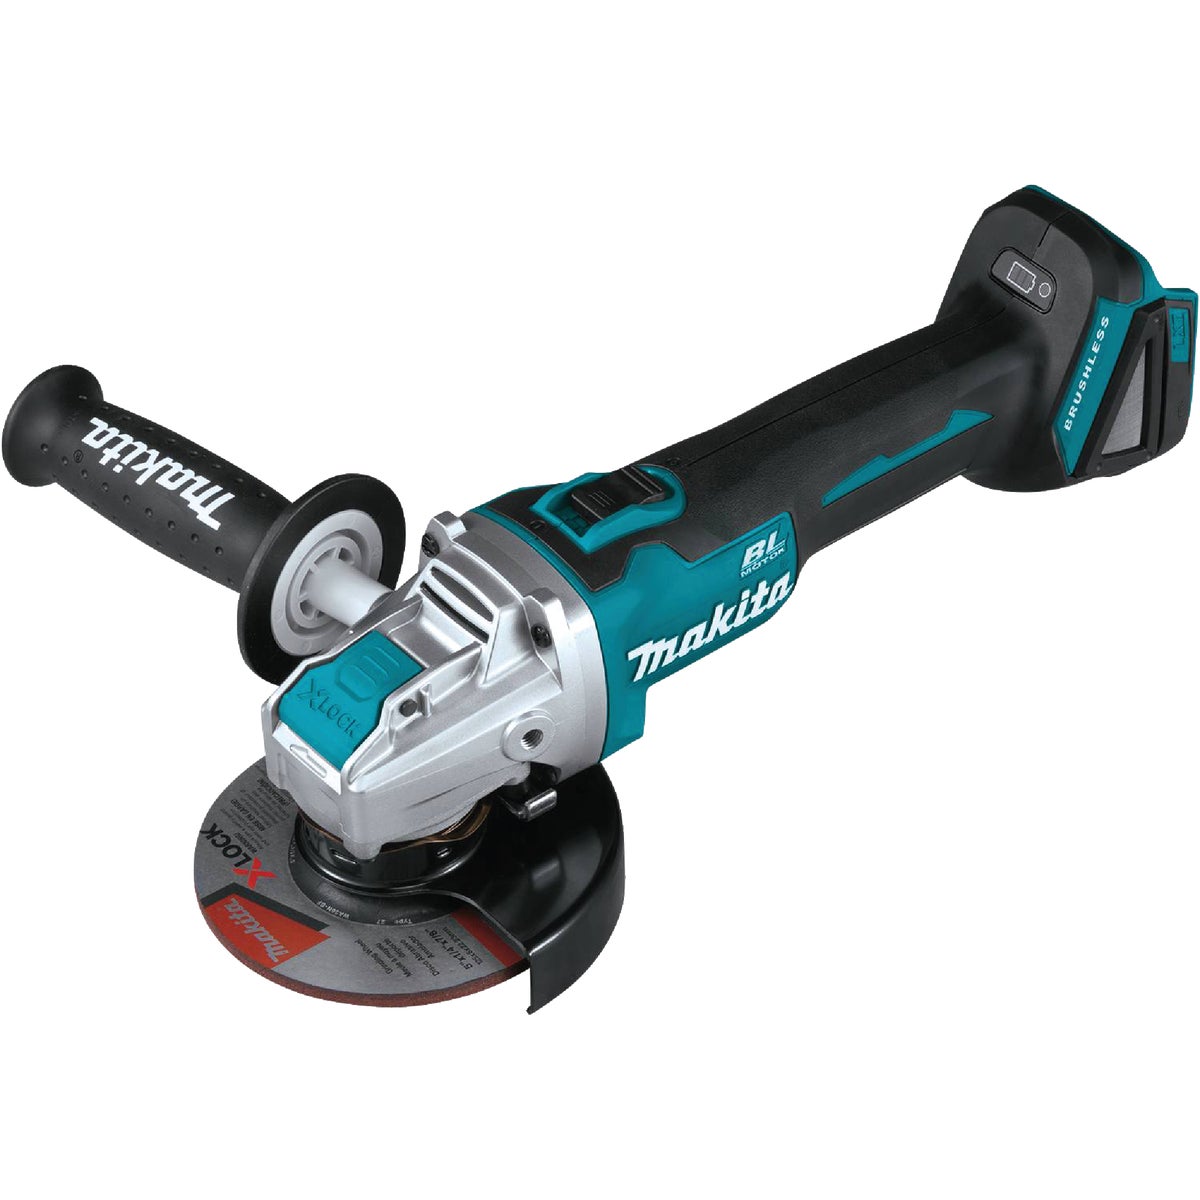 Makita 18 Volt LXT Lithium-Ion 4-1/2 In. - 5 In. Brushless X-LOCK Cordless Angle Grinder (Tool Only)